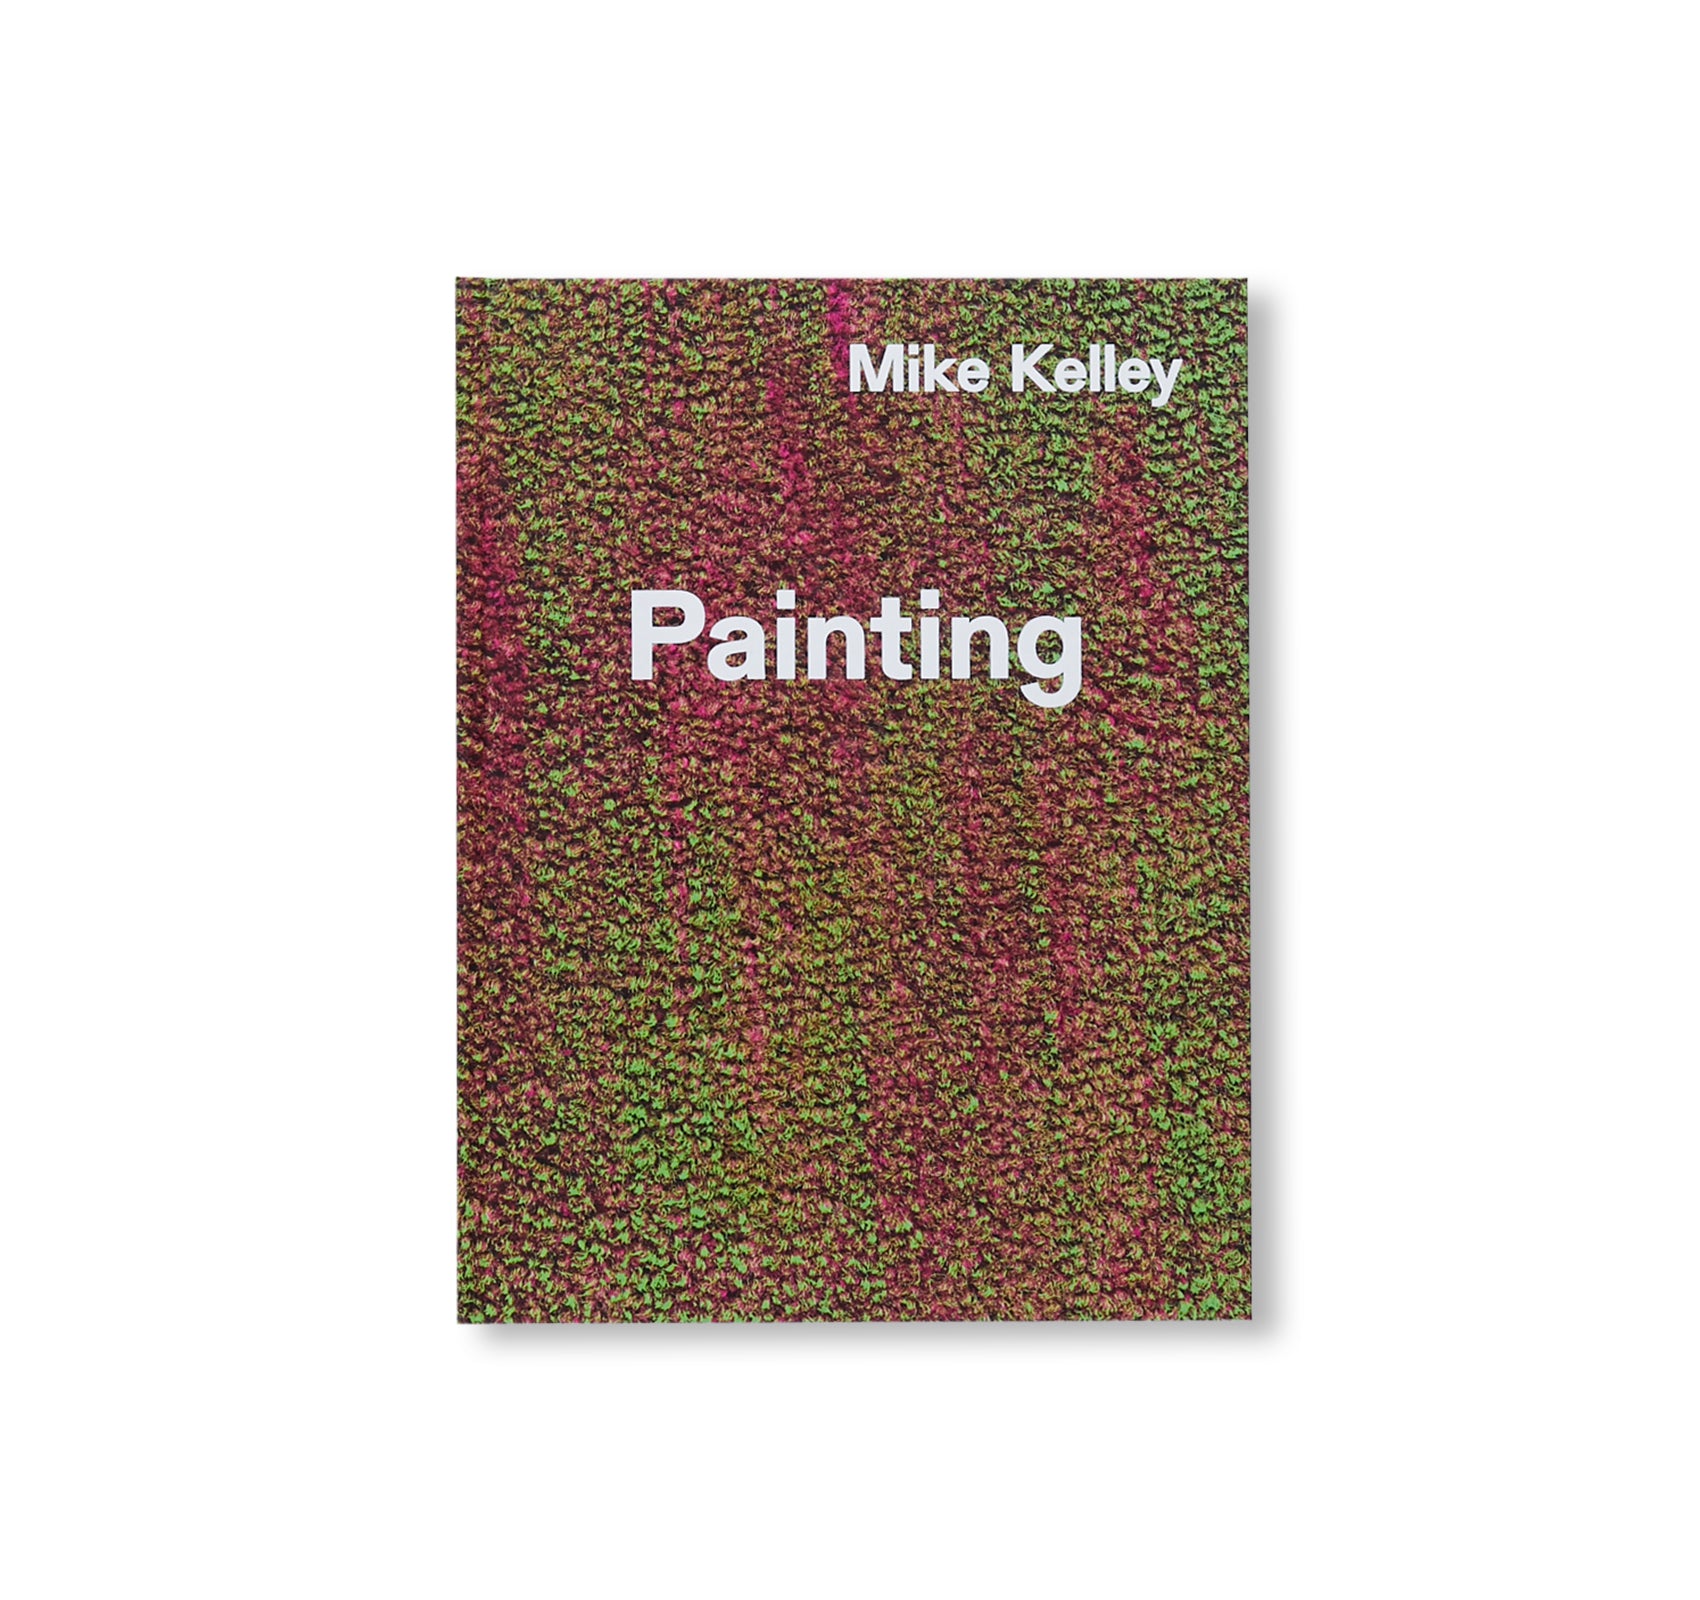 TIMELESS PAINTING by Mike Kelley